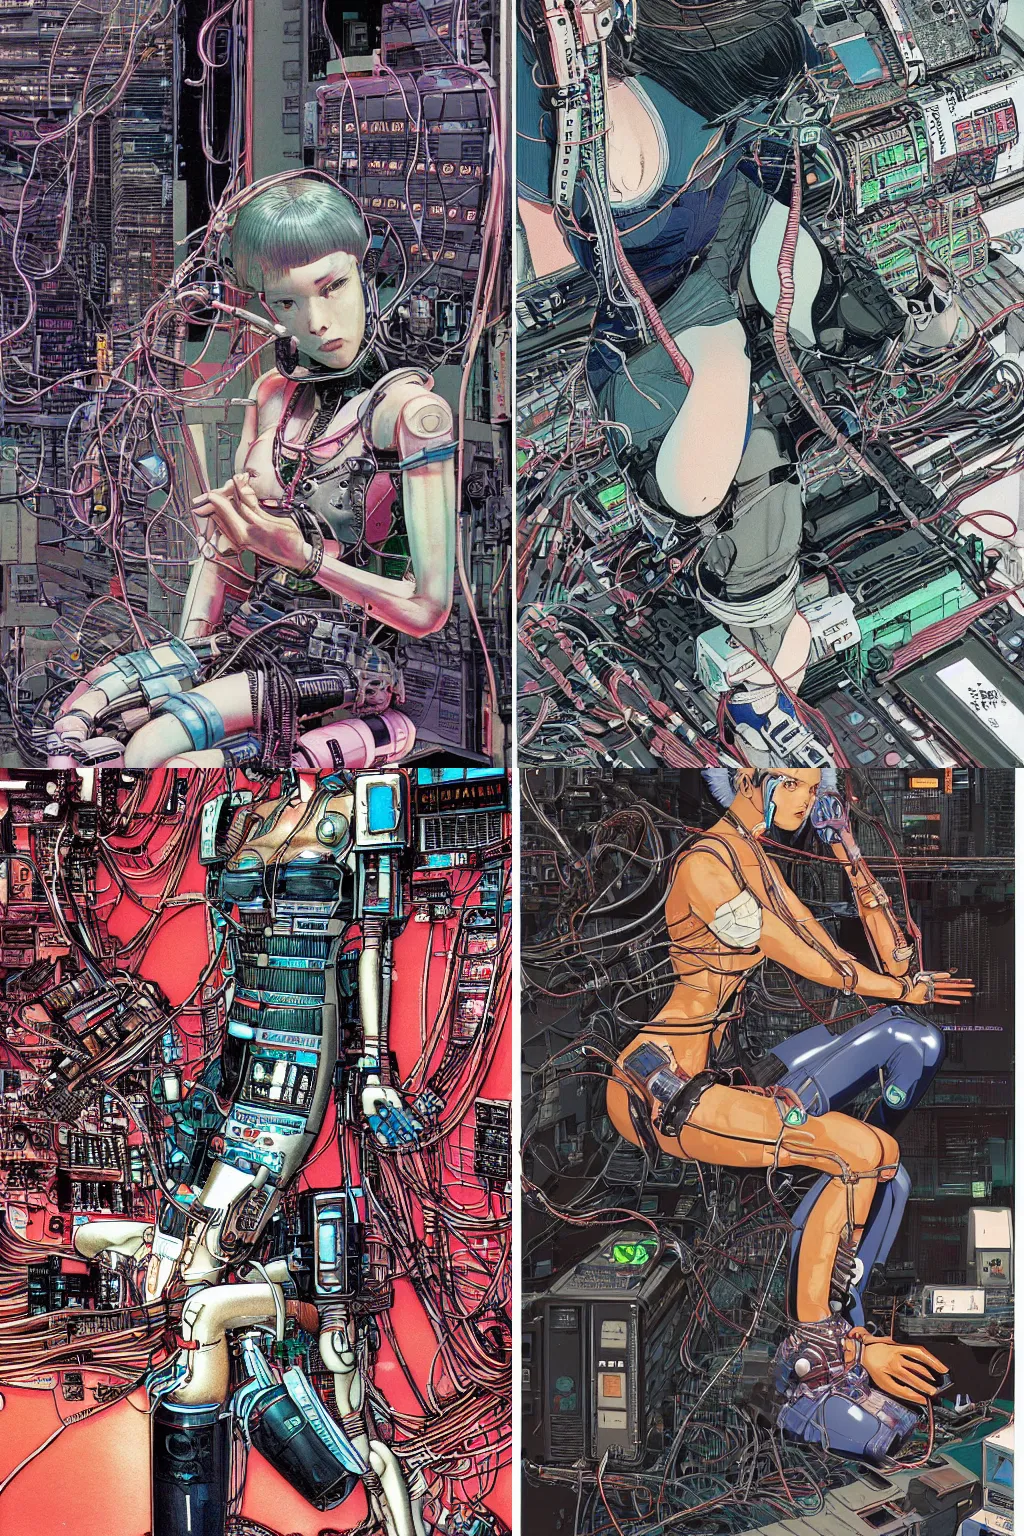 Prompt: an hyper-detailed cyberpunk illustration of a female android seated on the floor in a tech labor, seen from the side with her body open showing cables and wires coming out, by masamune shirow, and katsuhiro otomo,. japan, 1980s, centered, colorful